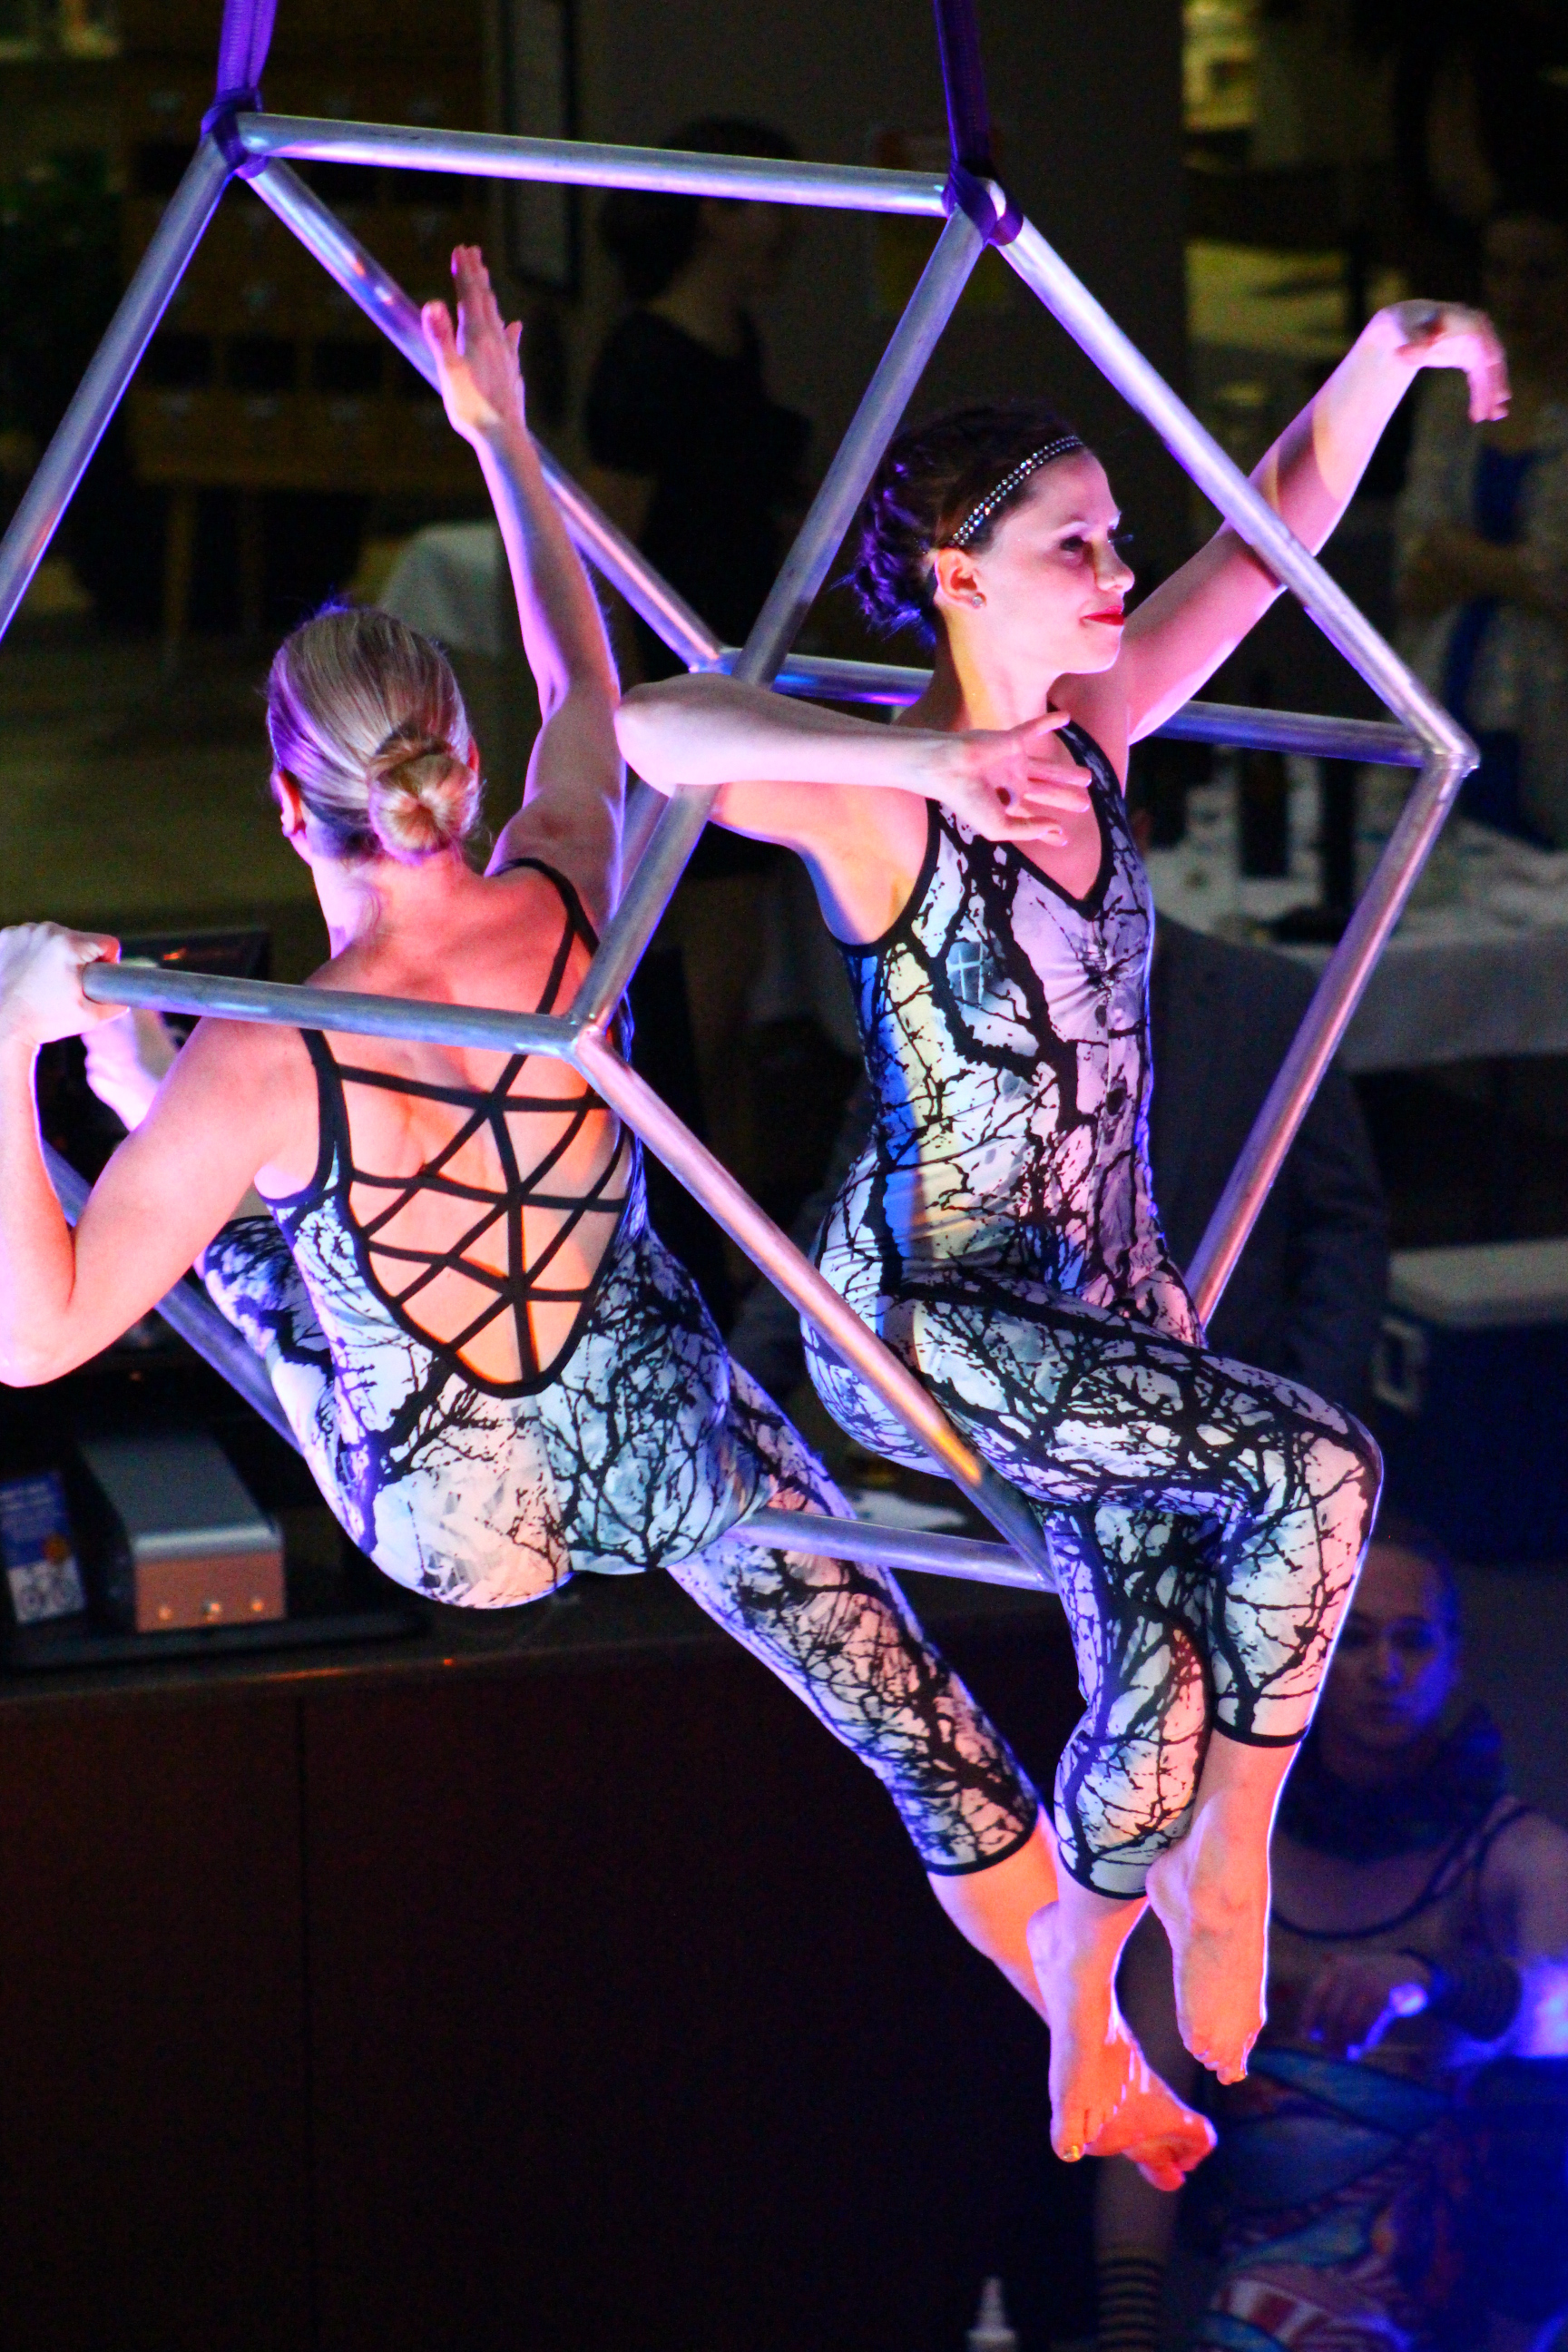 Two performers balancing in suspended cube frame